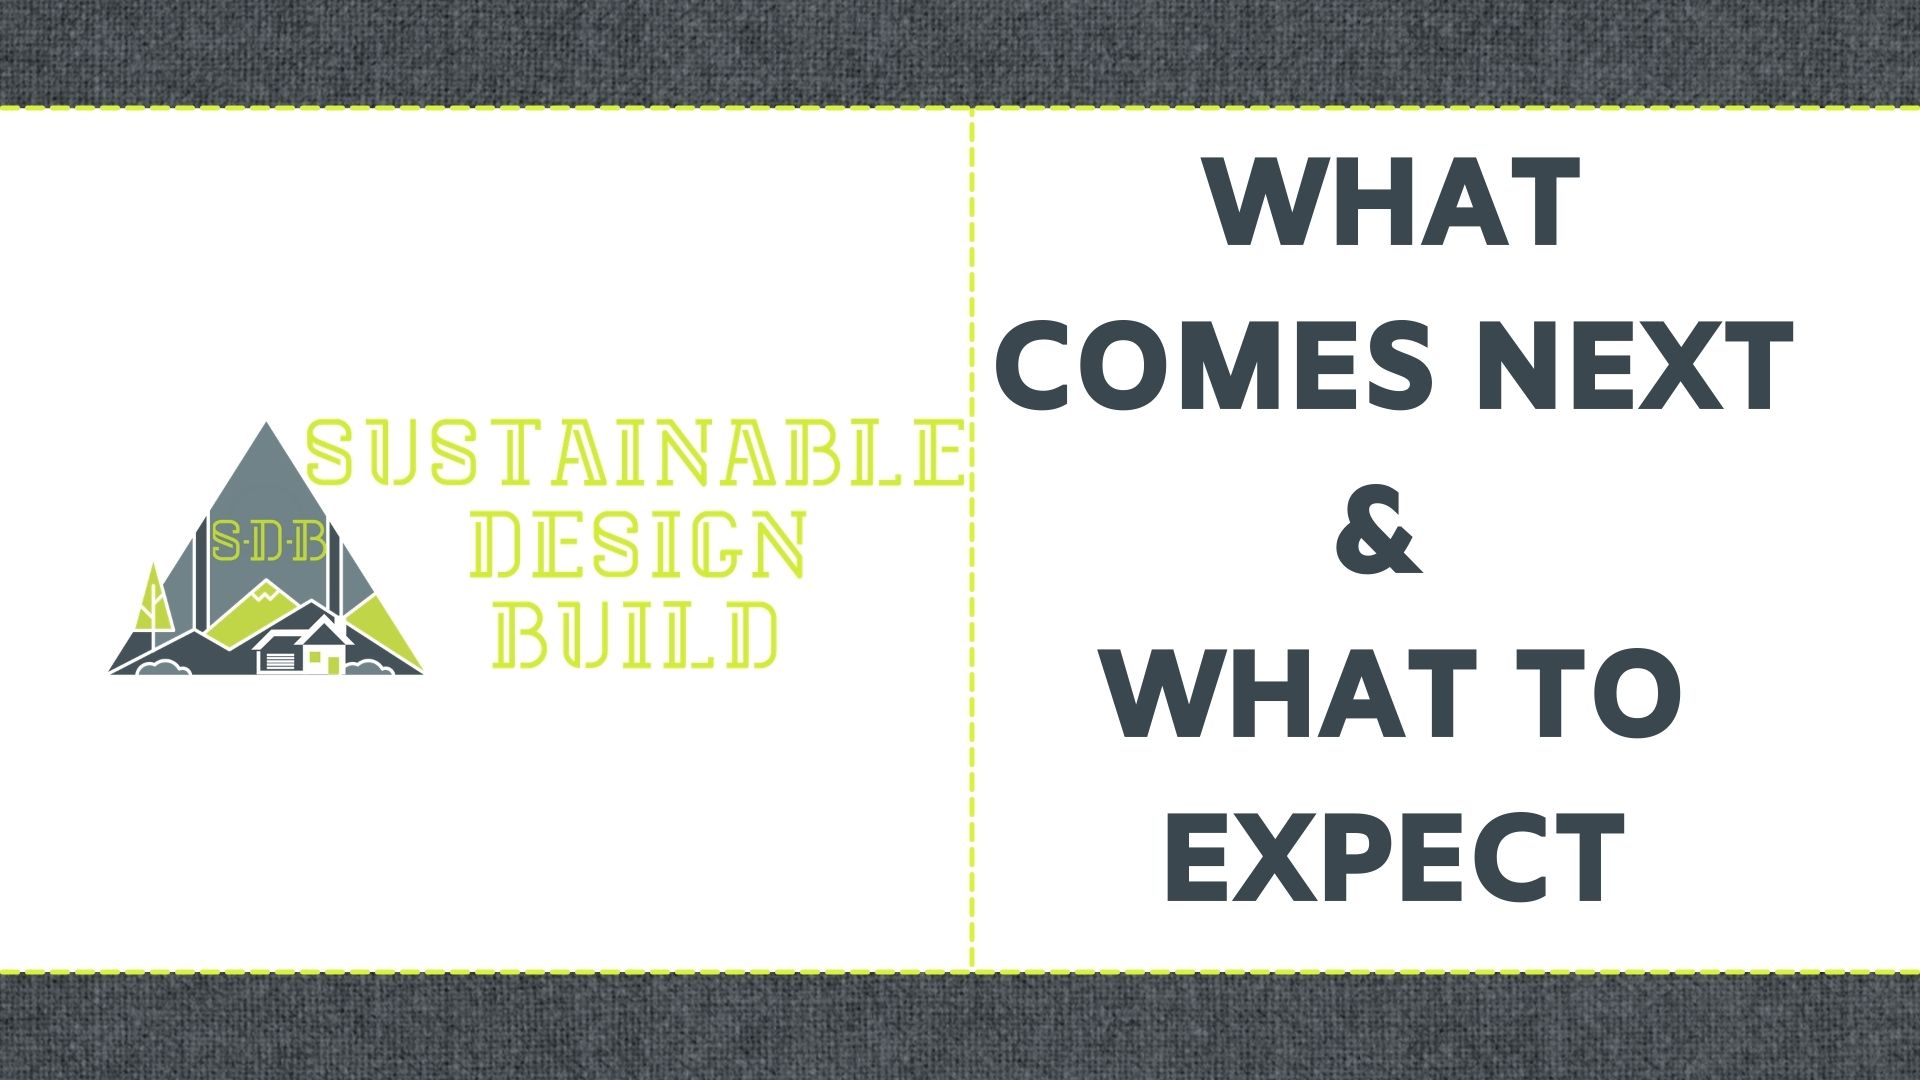 Working with sustainable design build